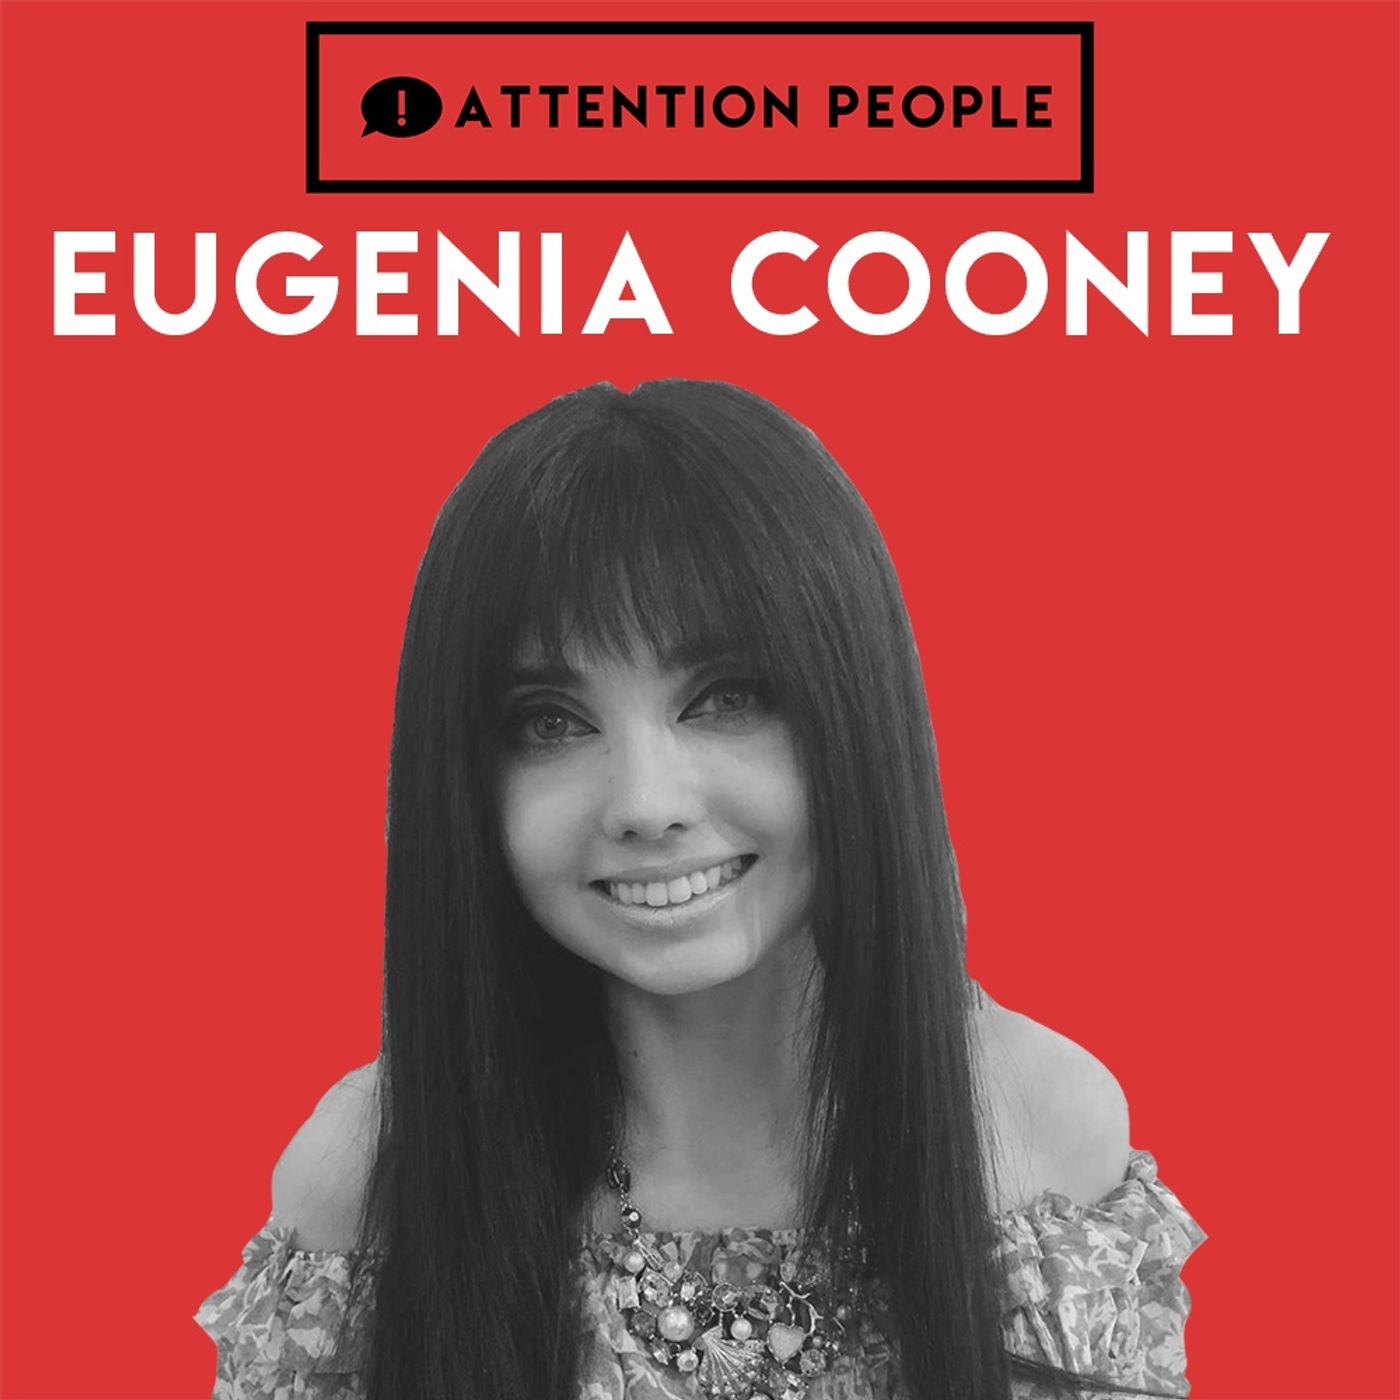 Eugenia Cooney - Recovery, Staying Positive & Dealing With Hate